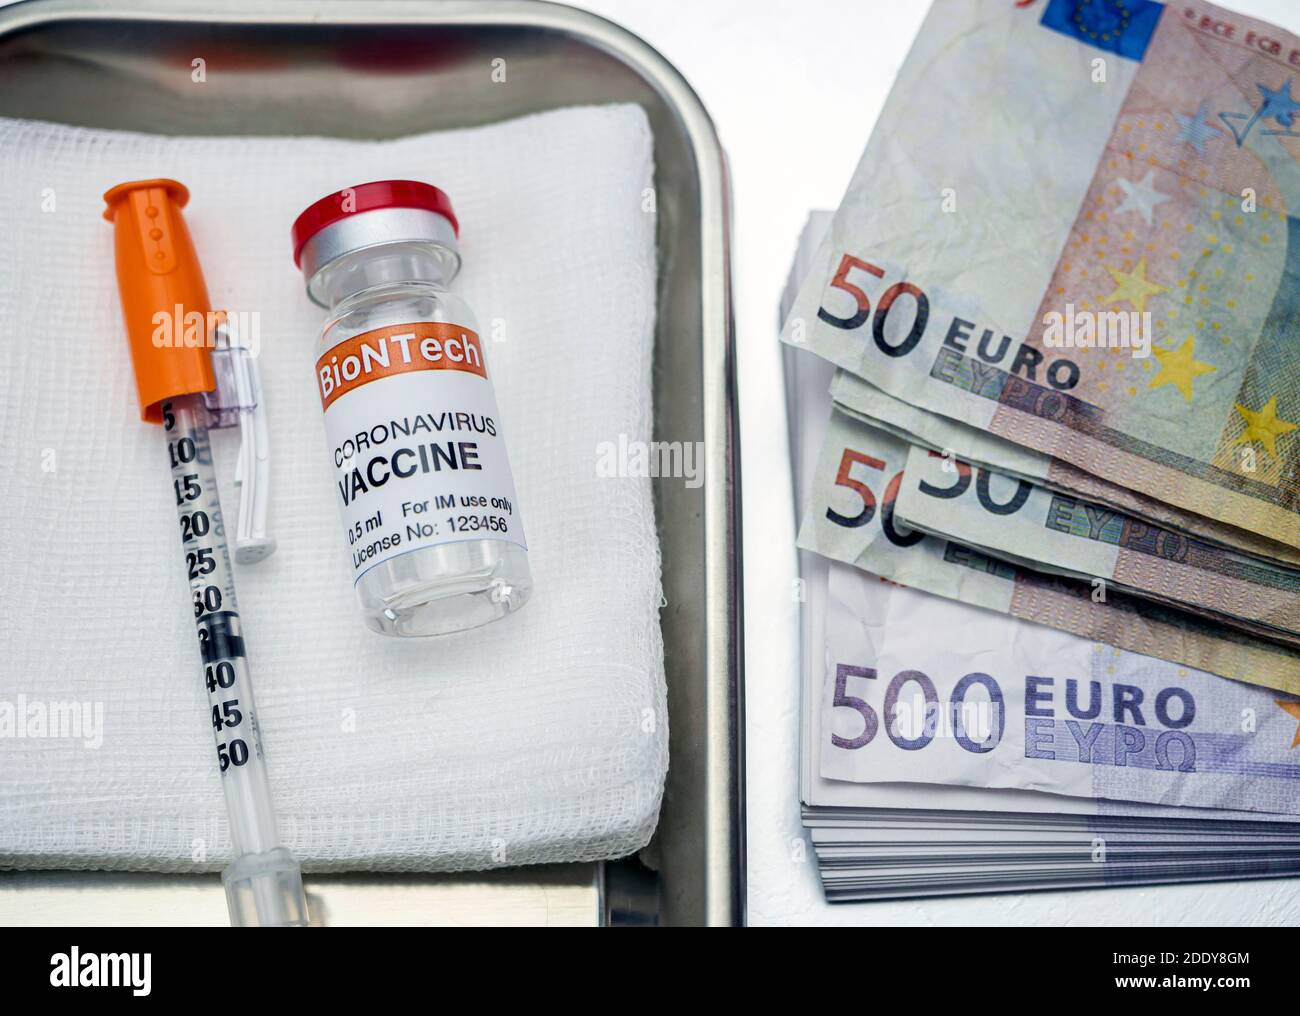 Covid-19 coronavirus vaccine for vaccination plan together with banknotes, conceptual image, recreation experimental treatment fictitious Stock Photo